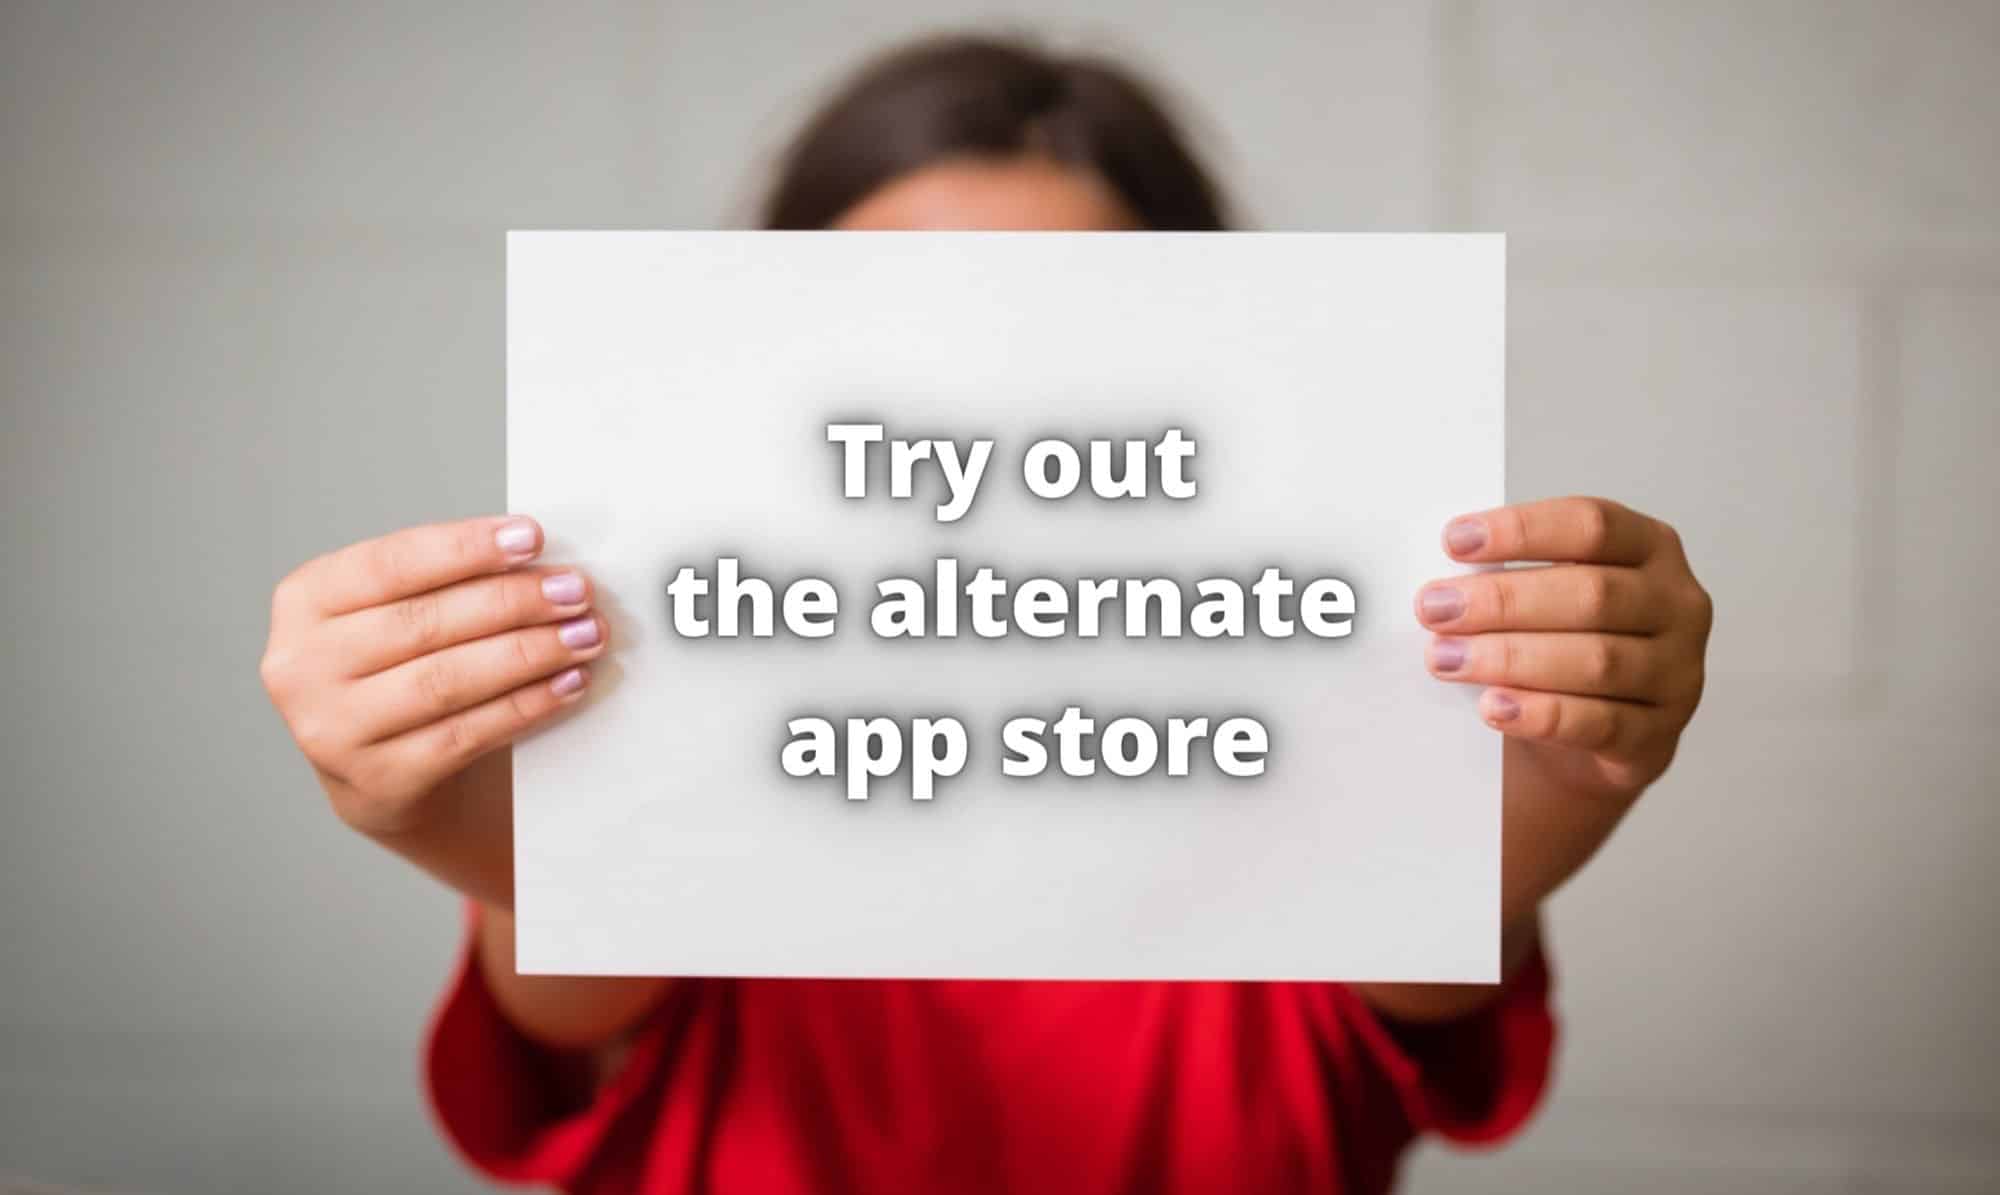 Try out the alternate app store